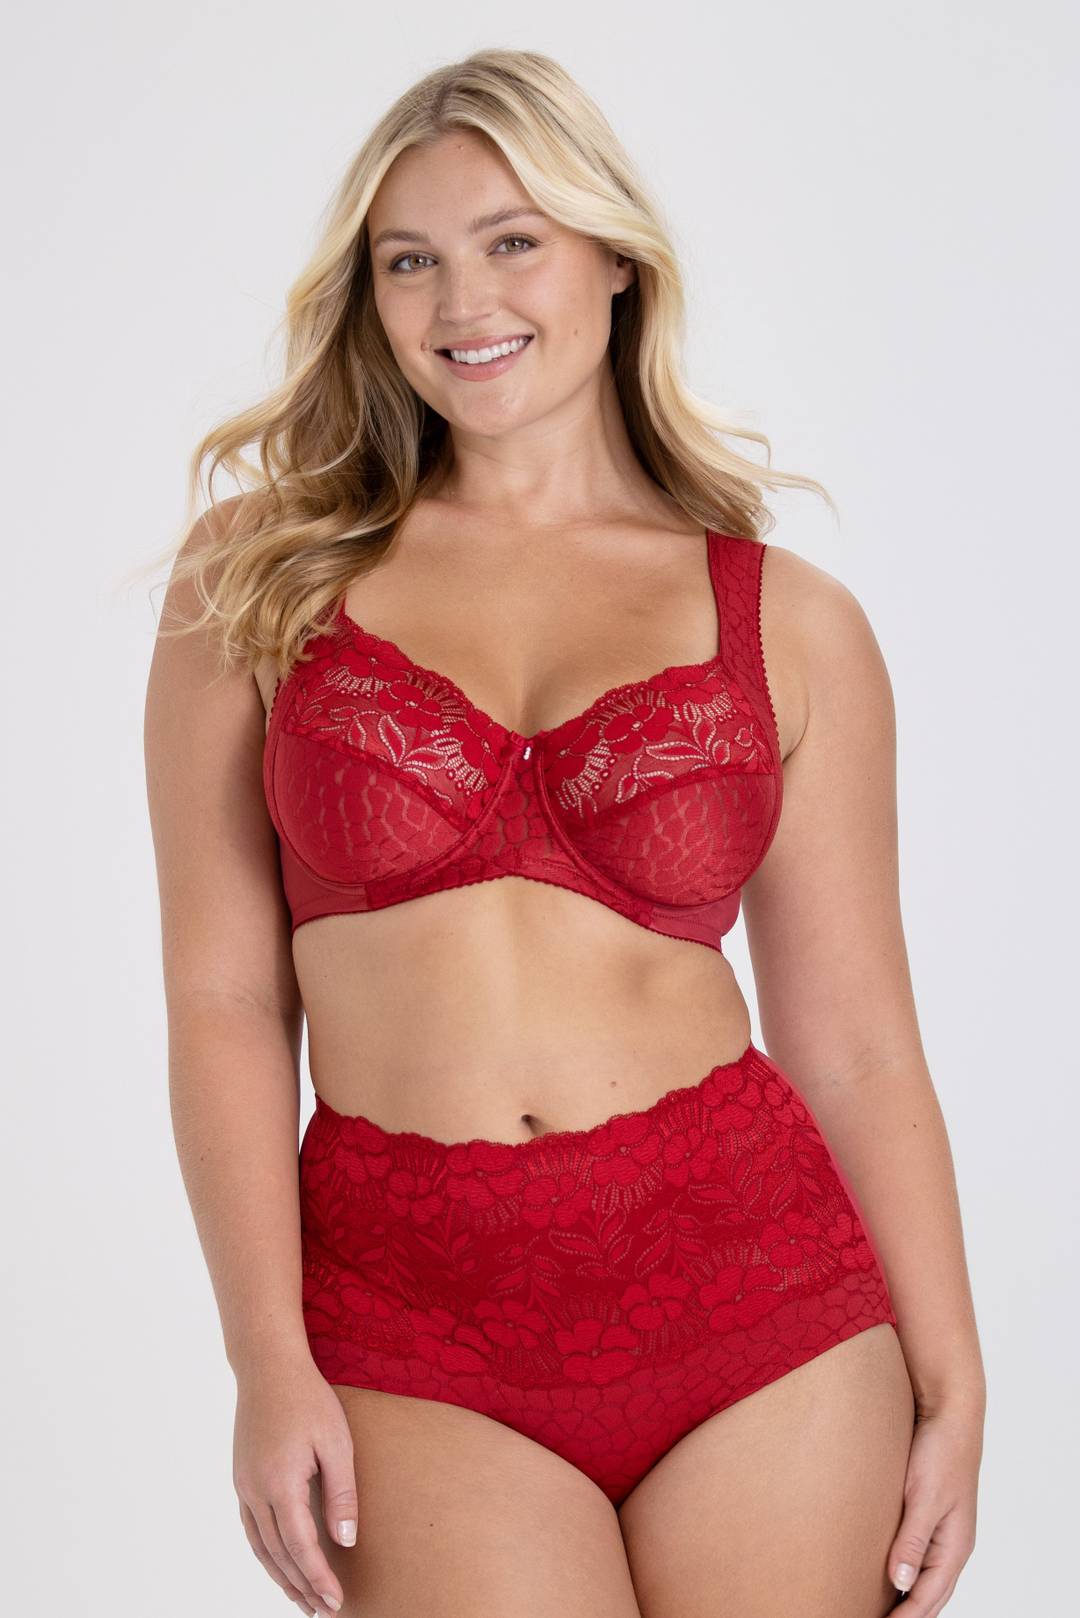 Buy Softy Underwired Full Knitted Floral Print Lace Red Bra at